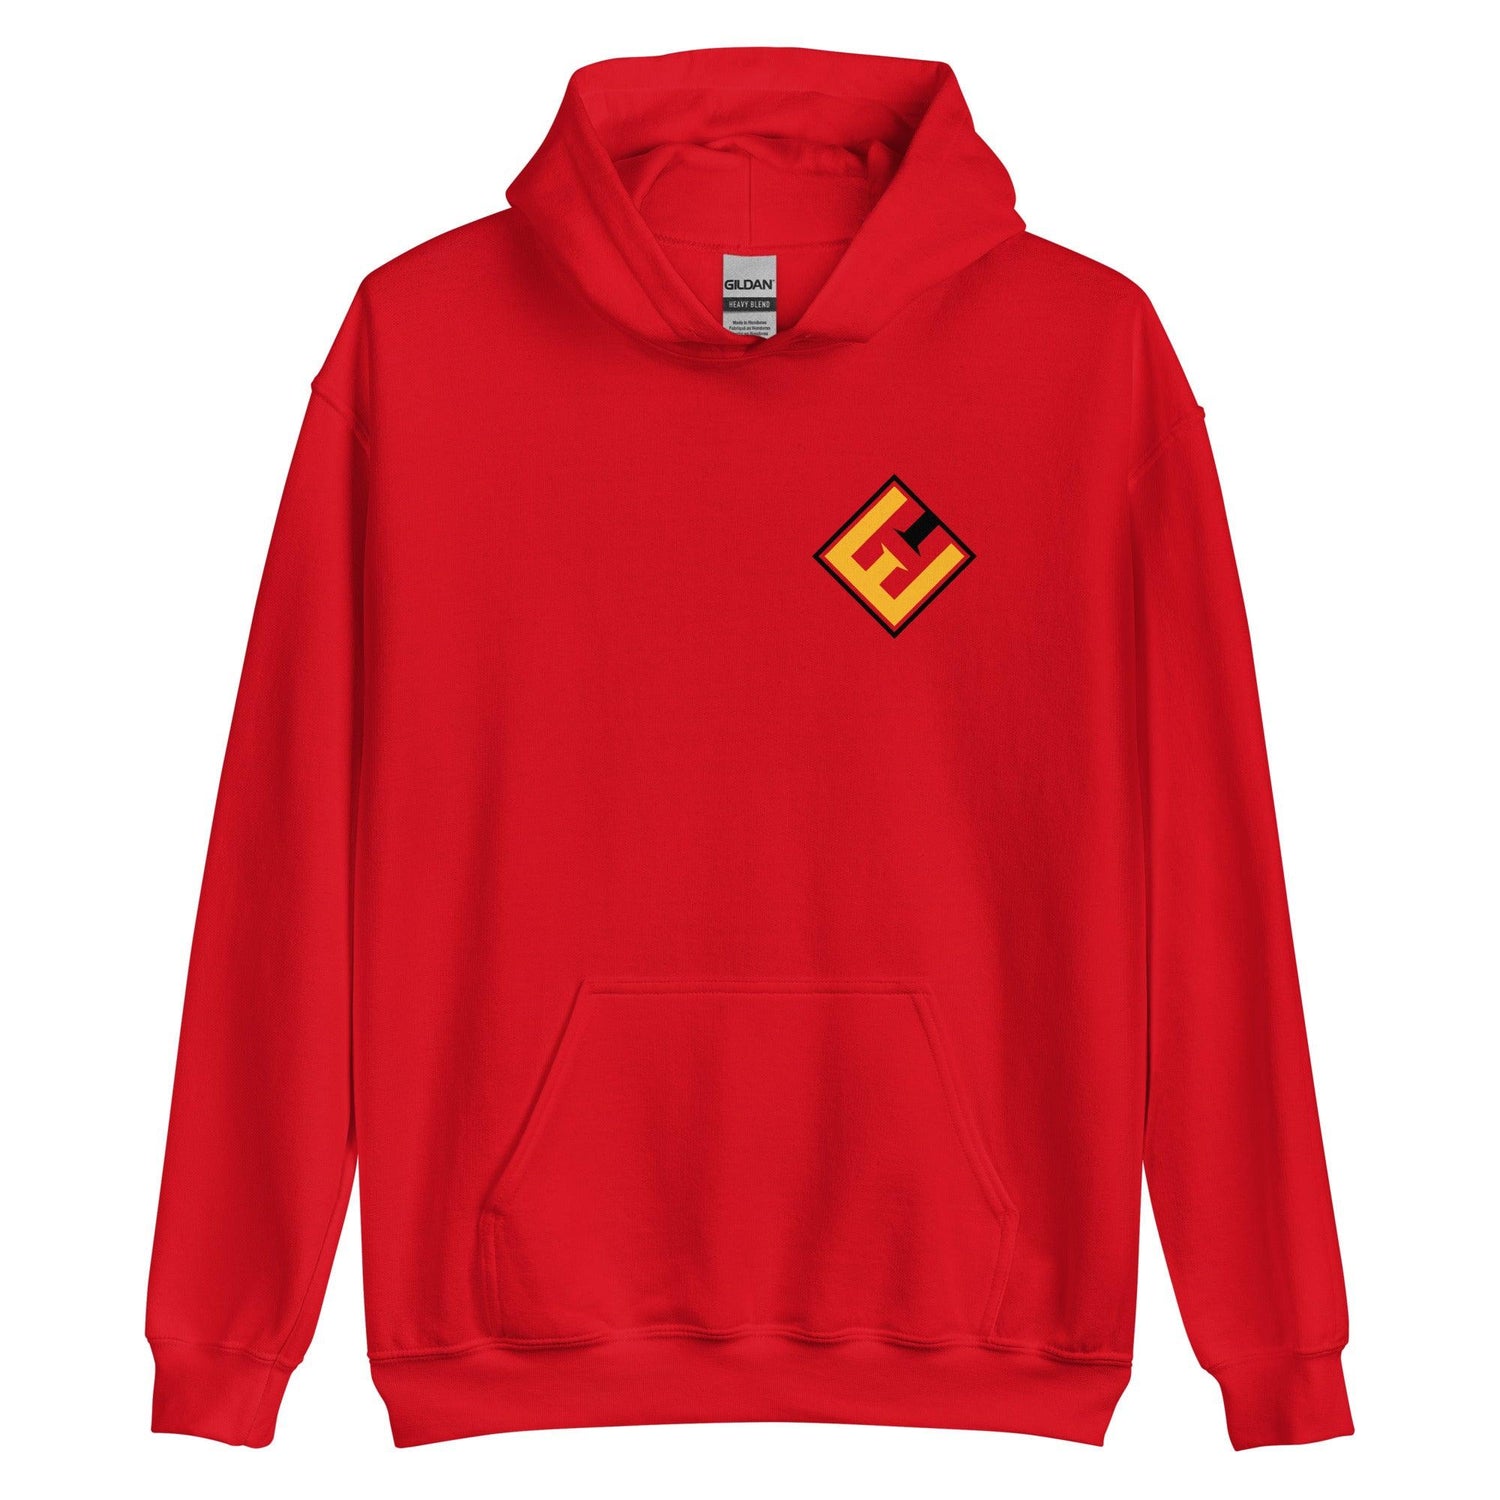 Eric Hanhold “EH” Hoodie - Fan Arch